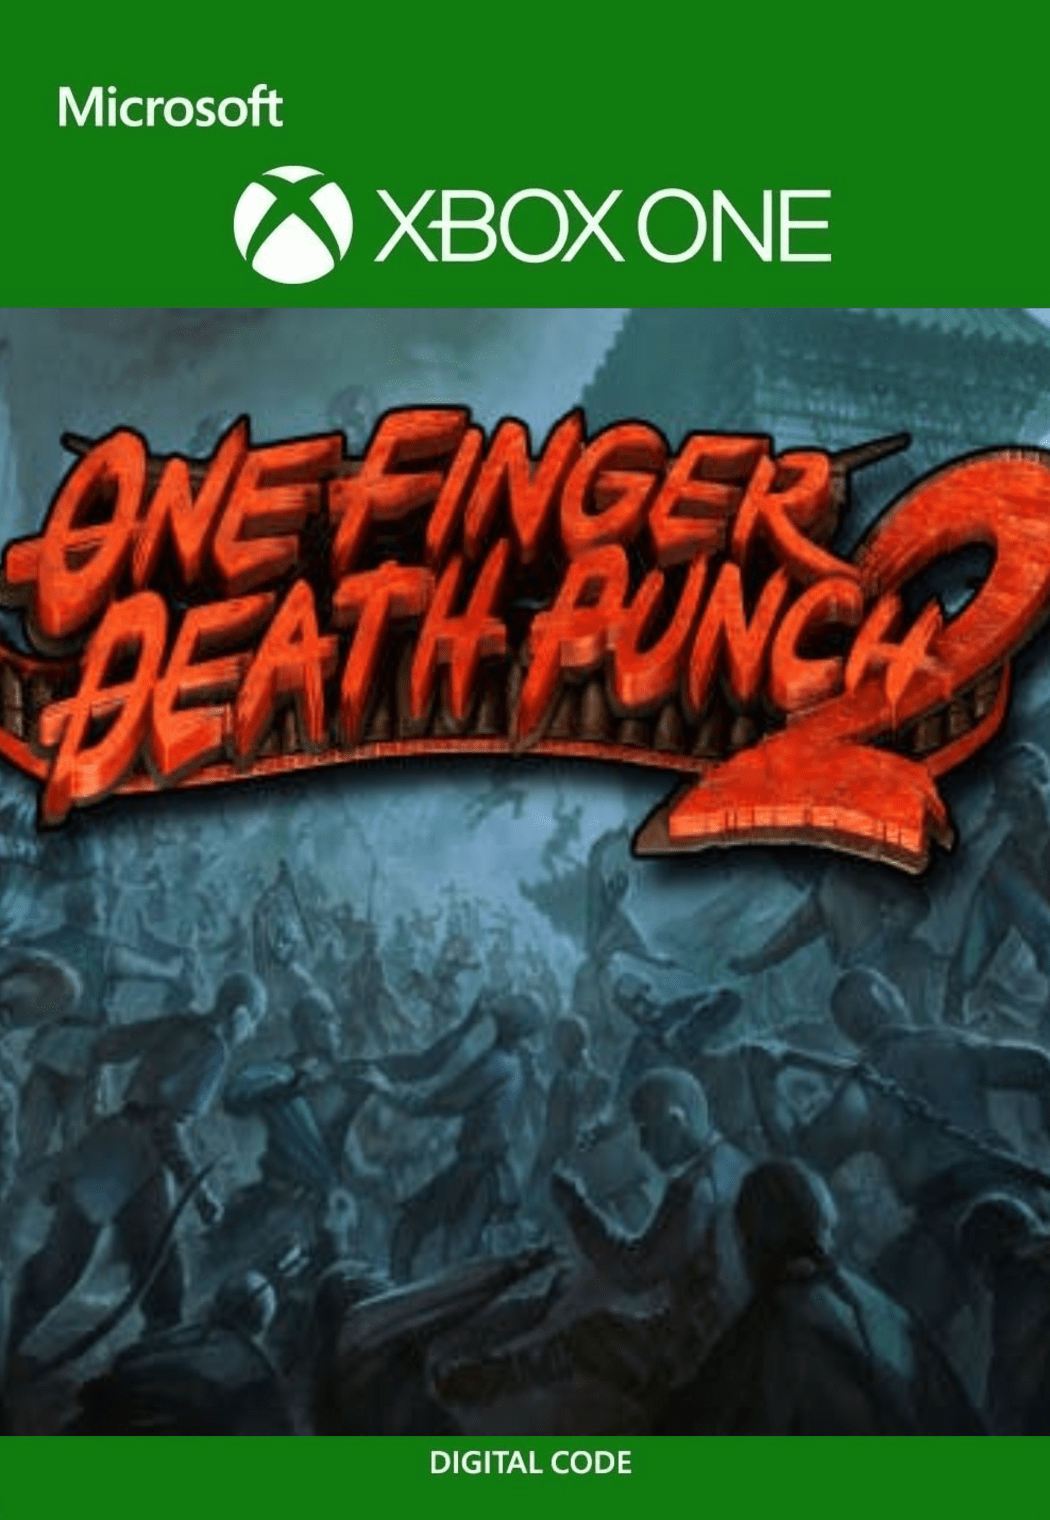 One finger death punch steam фото 94